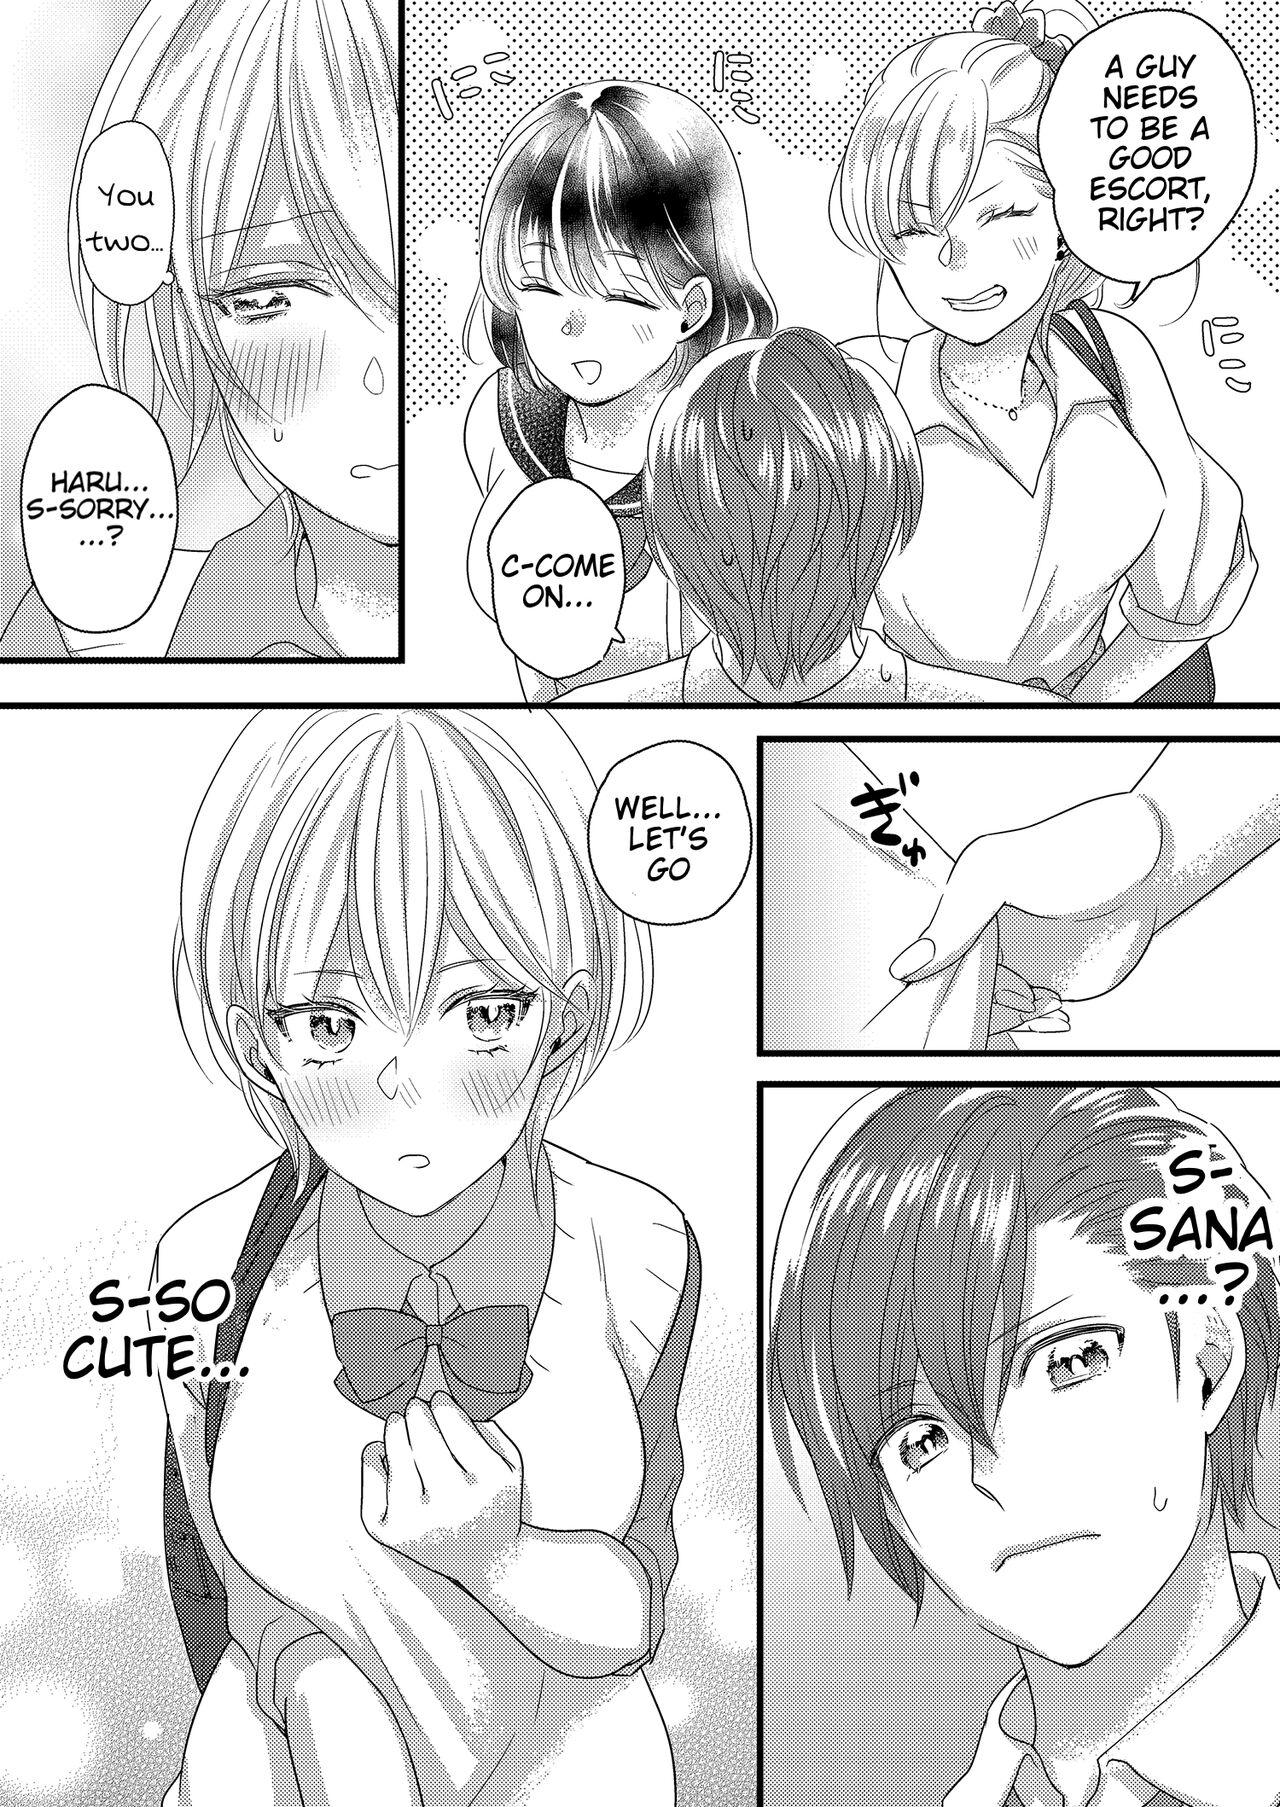 Wet Pussy Haru and Sana ～Love Connected Through Cosplay～ - Original Parody - Picture 2